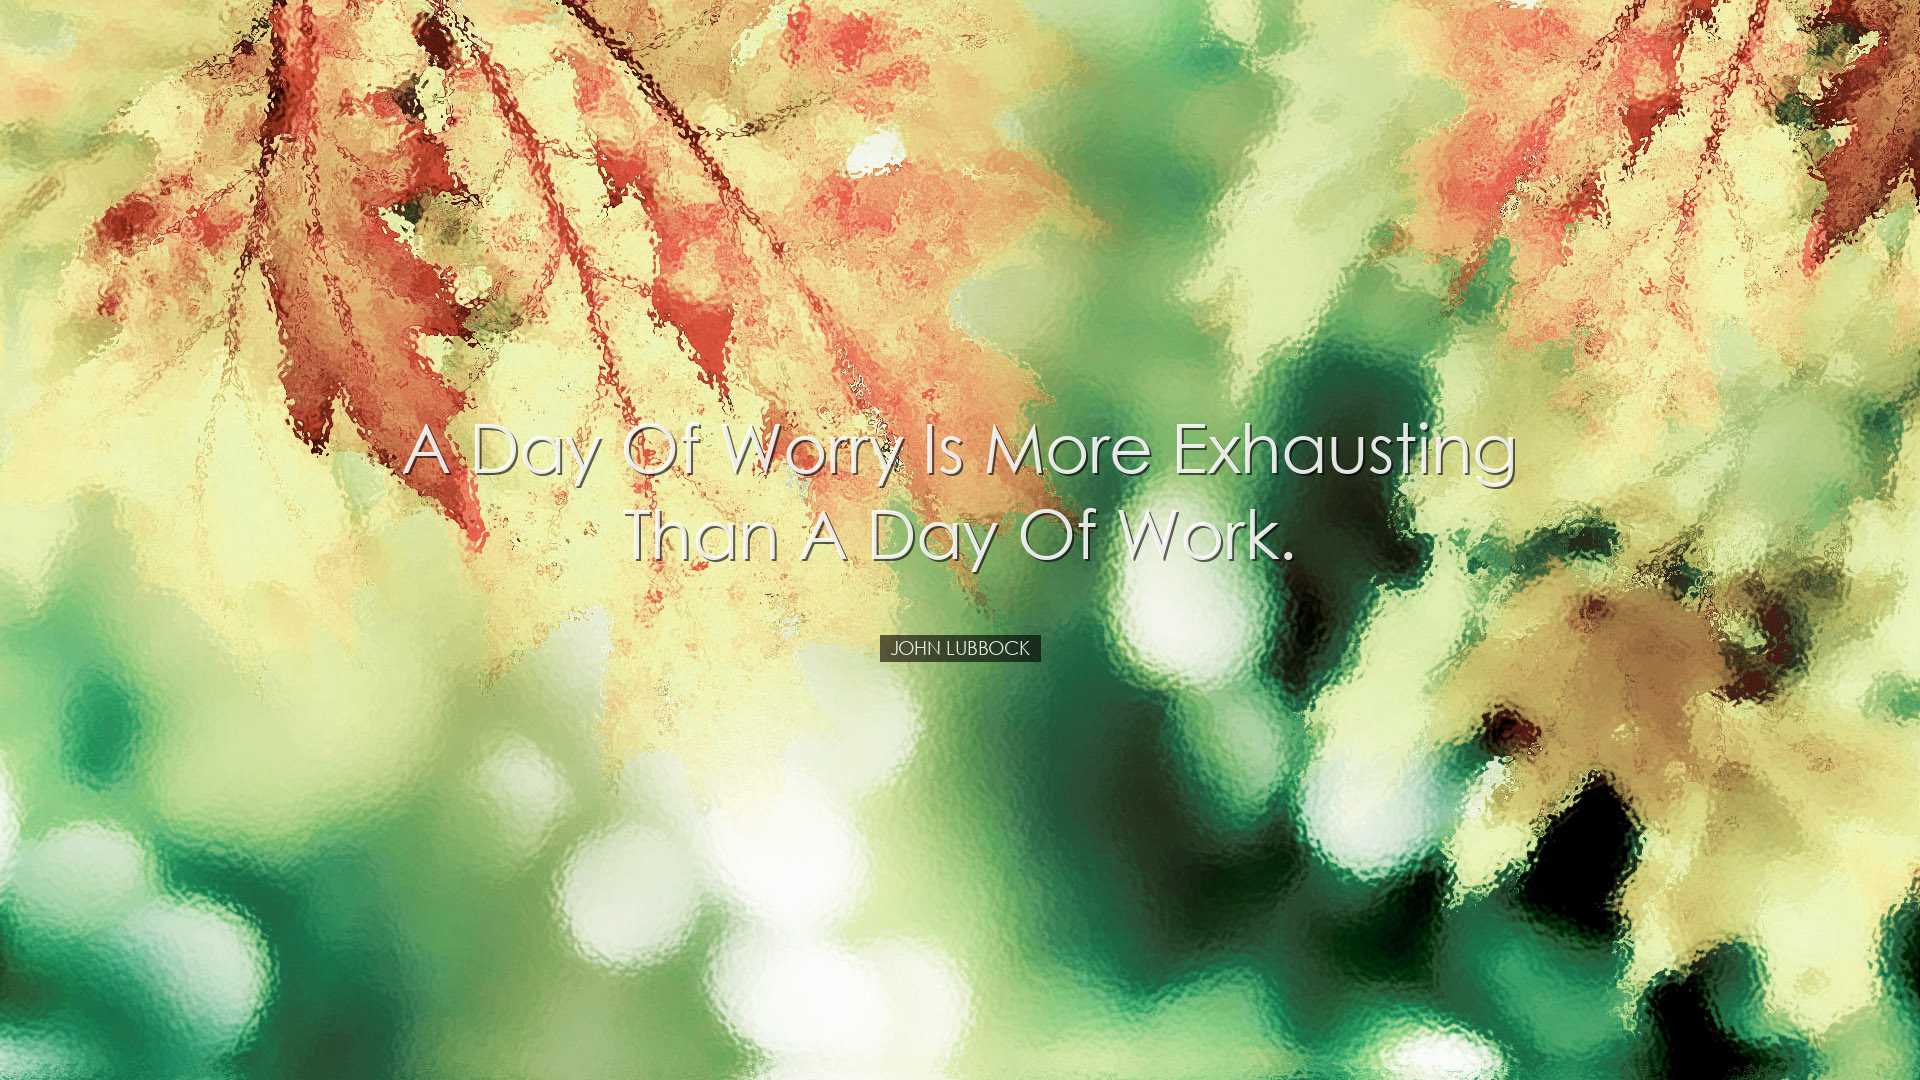 A day of worry is more exhausting than a day of work. - John Lubbo